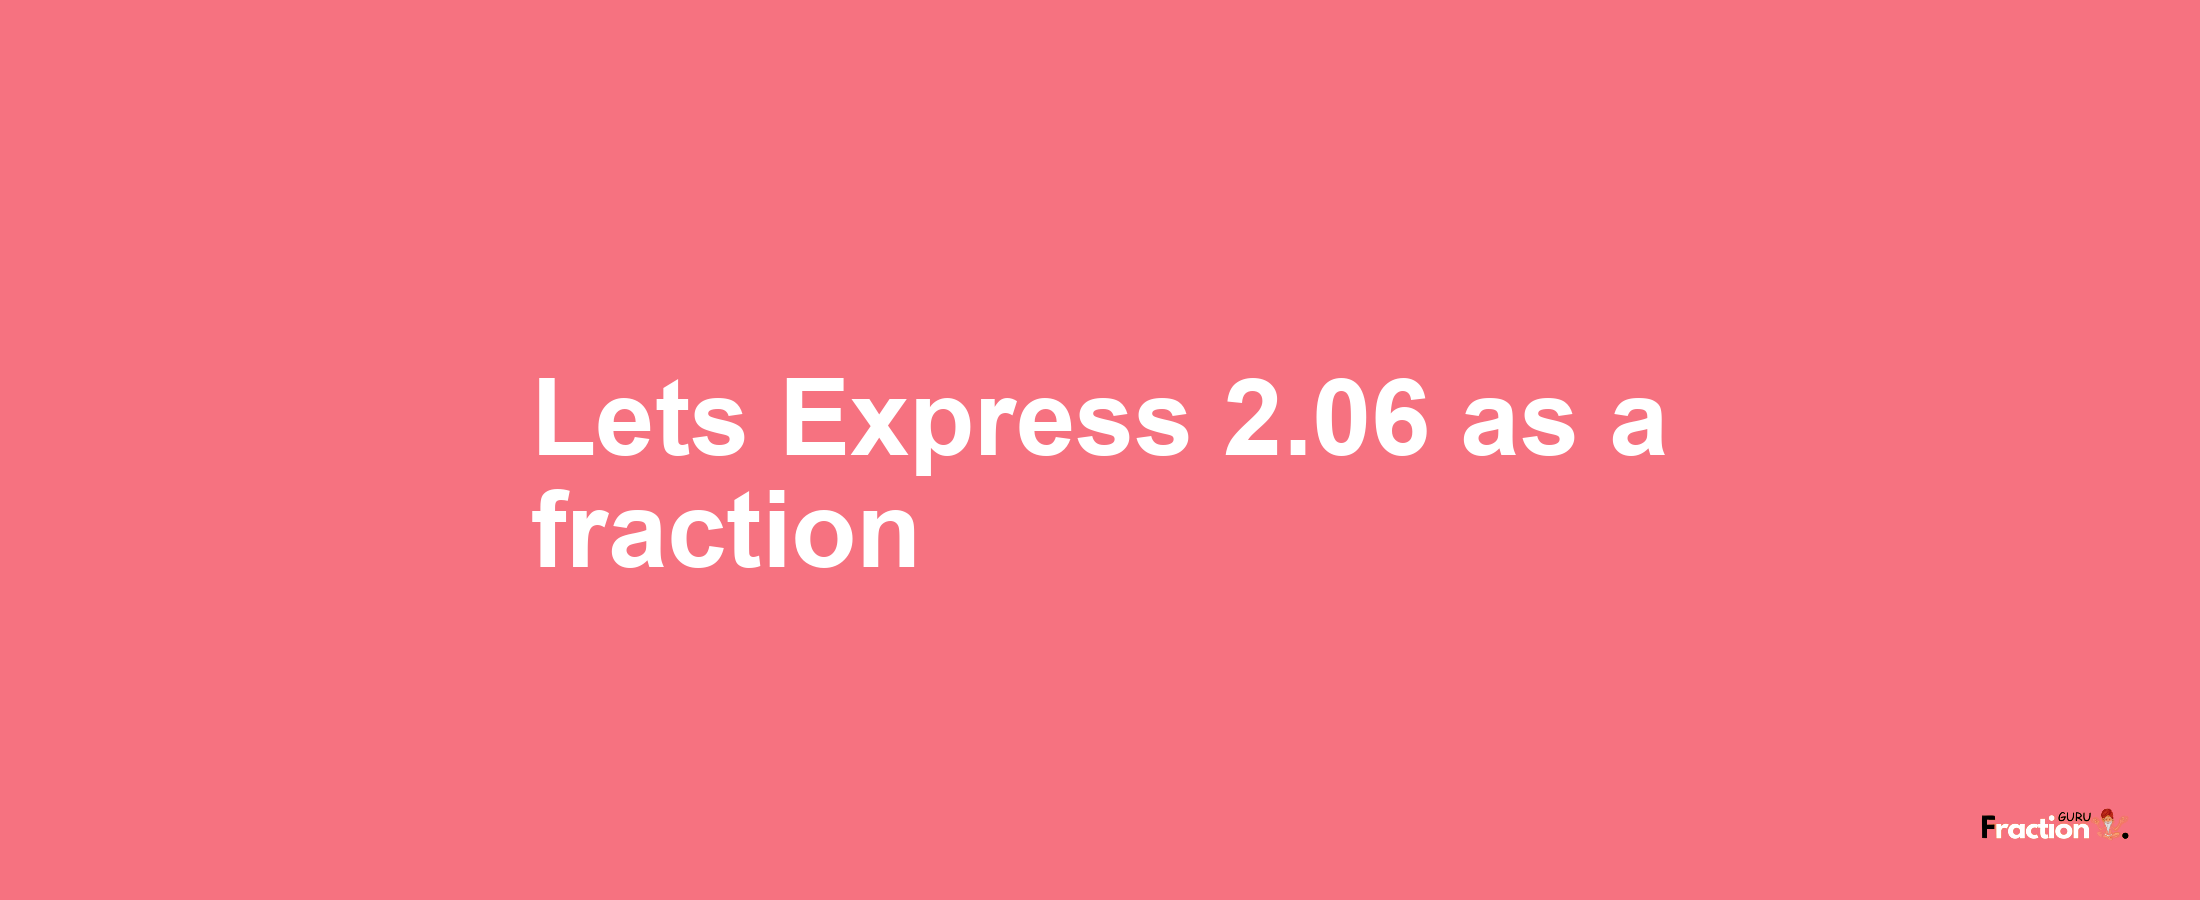 Lets Express 2.06 as afraction